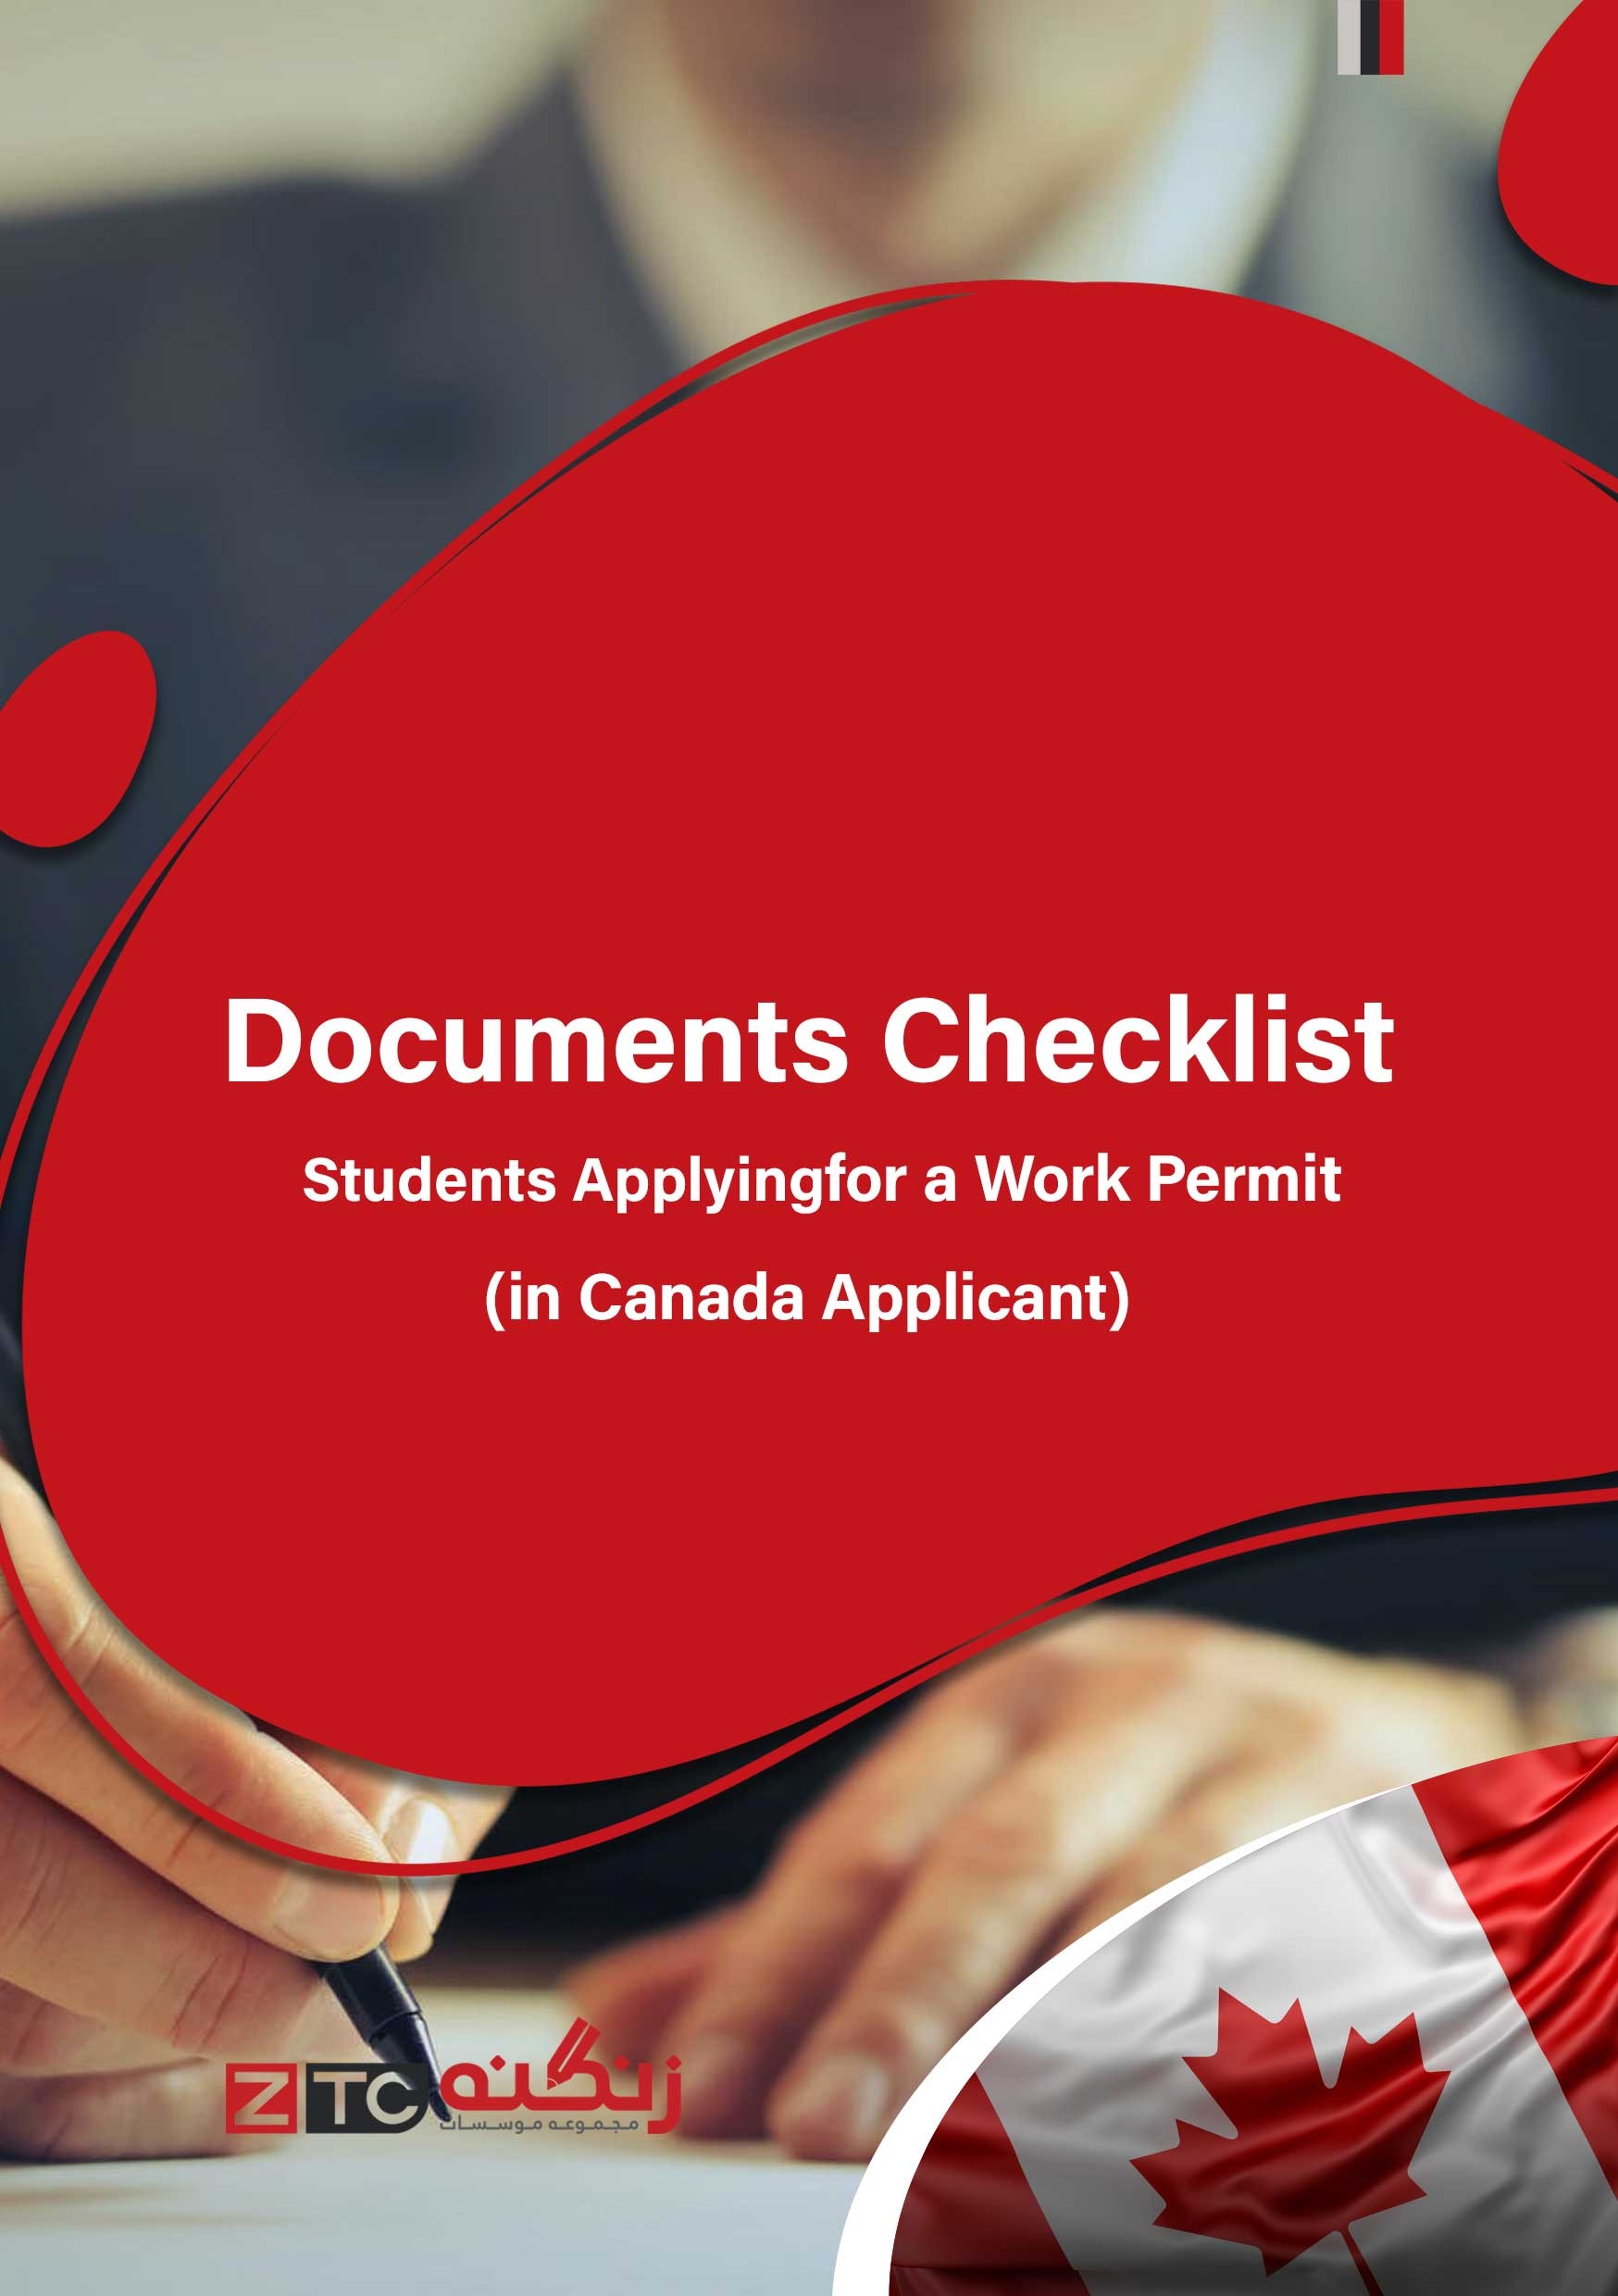 Documents Checklist - Students Applying for a Work Permit (in Canada Applicant)